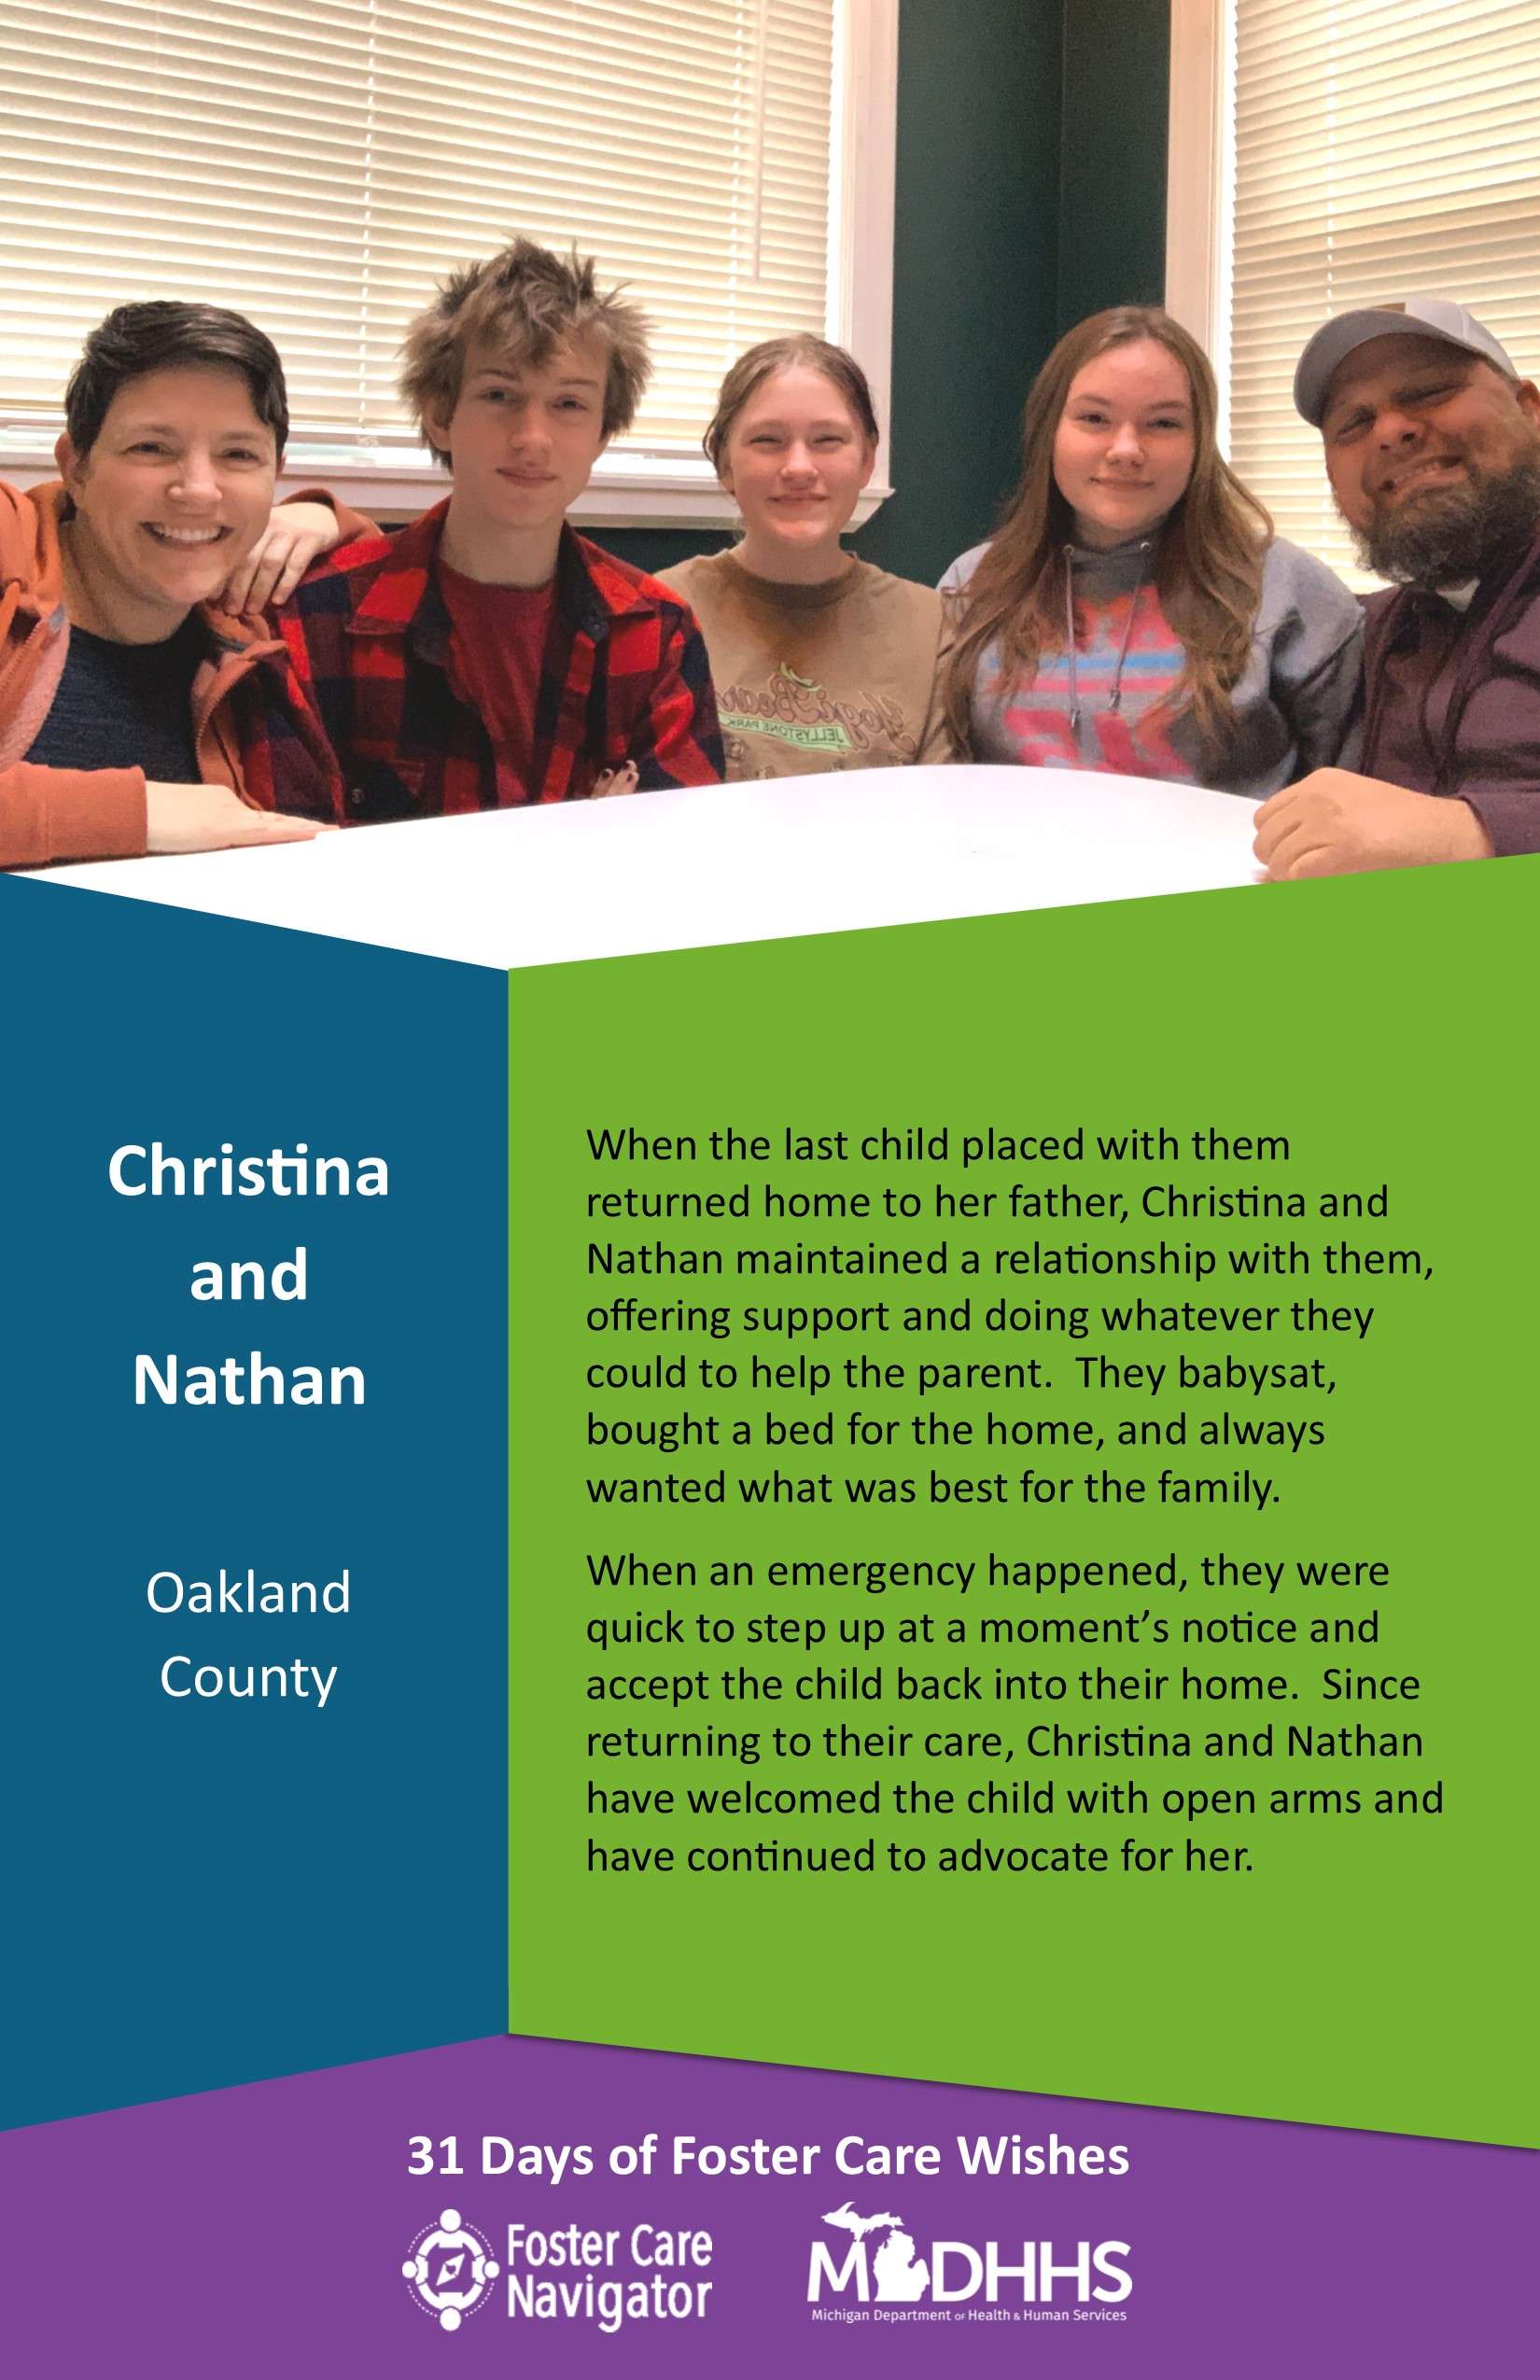 This full page feature includes all of the text listed in the body of this blog post as well as a photo of Christina and Nathan. The background is blue on the left, green on the right, and purple at the bottom of the page where the logos are located.